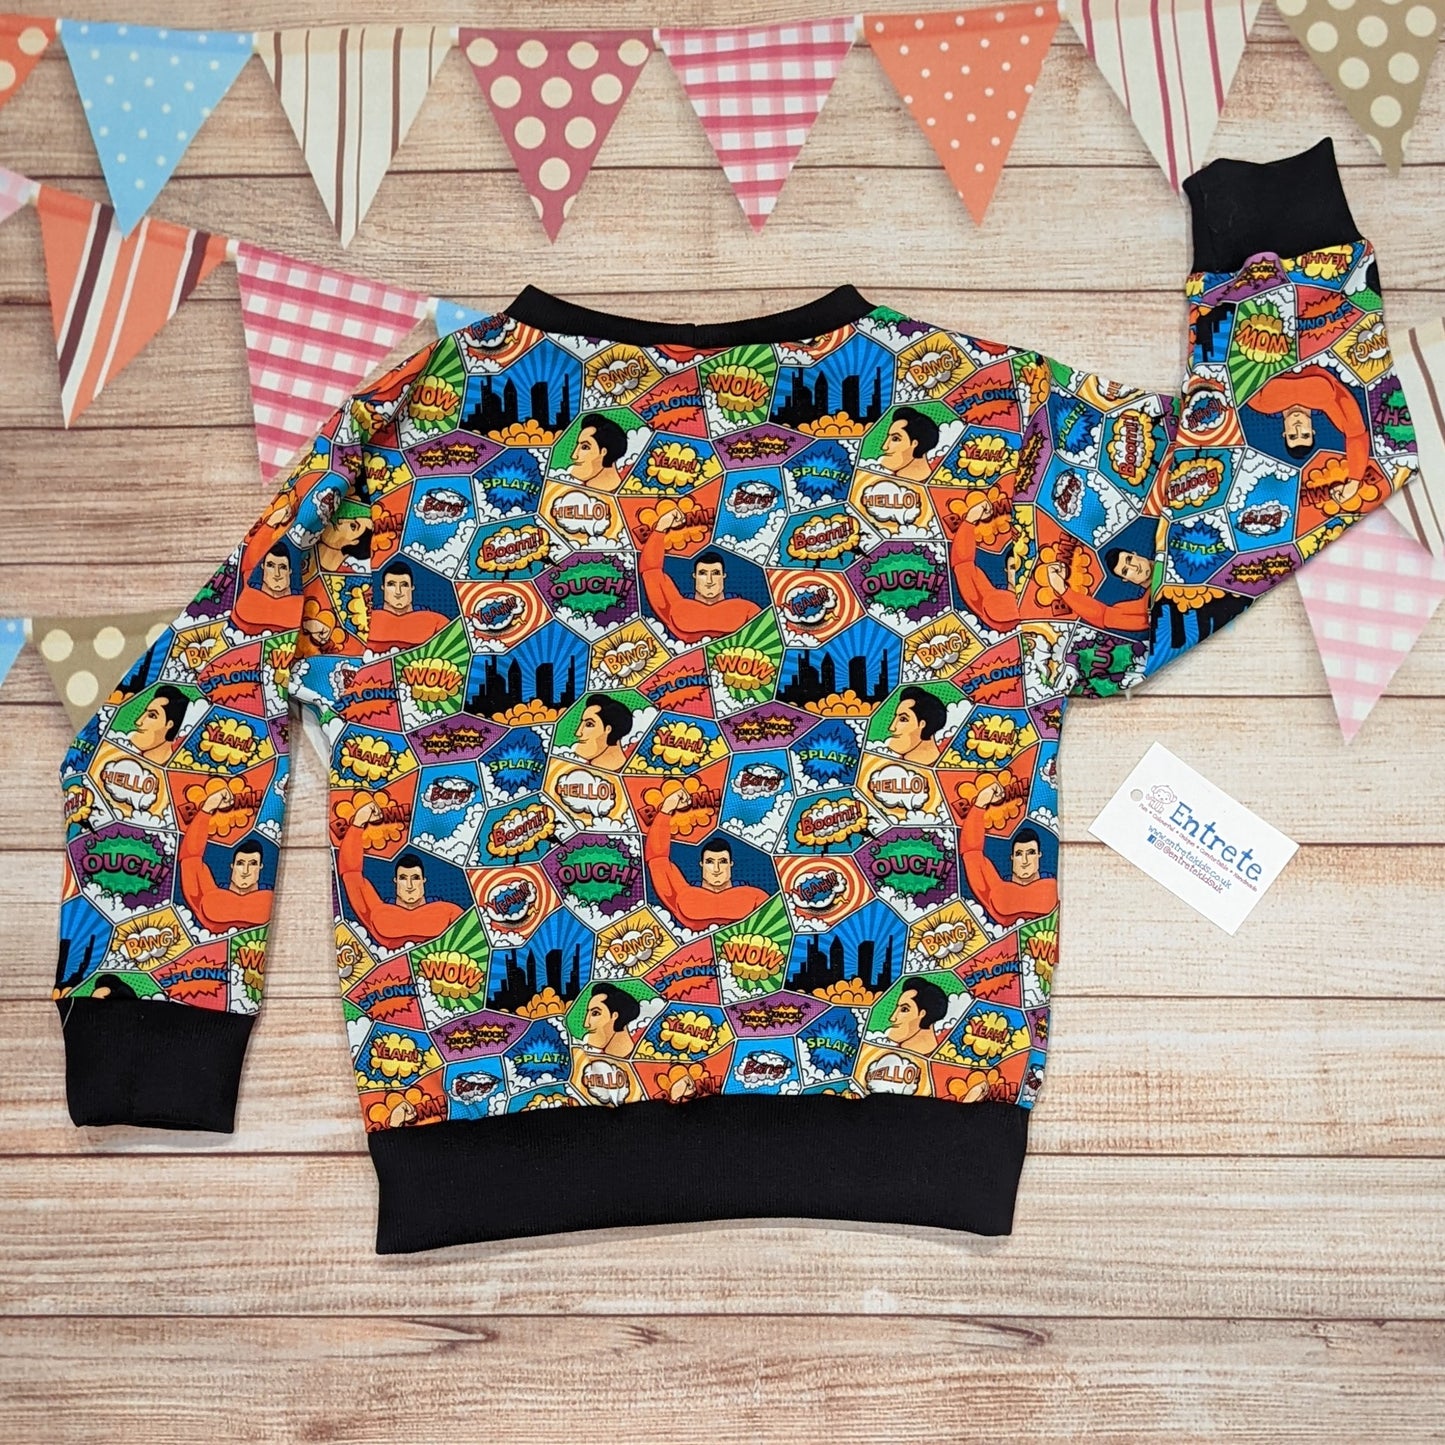 The awesome superhero sweatshirt. Handmade using colourful superhero cotton jersey and black cotton ribbing. Shown from the rear.